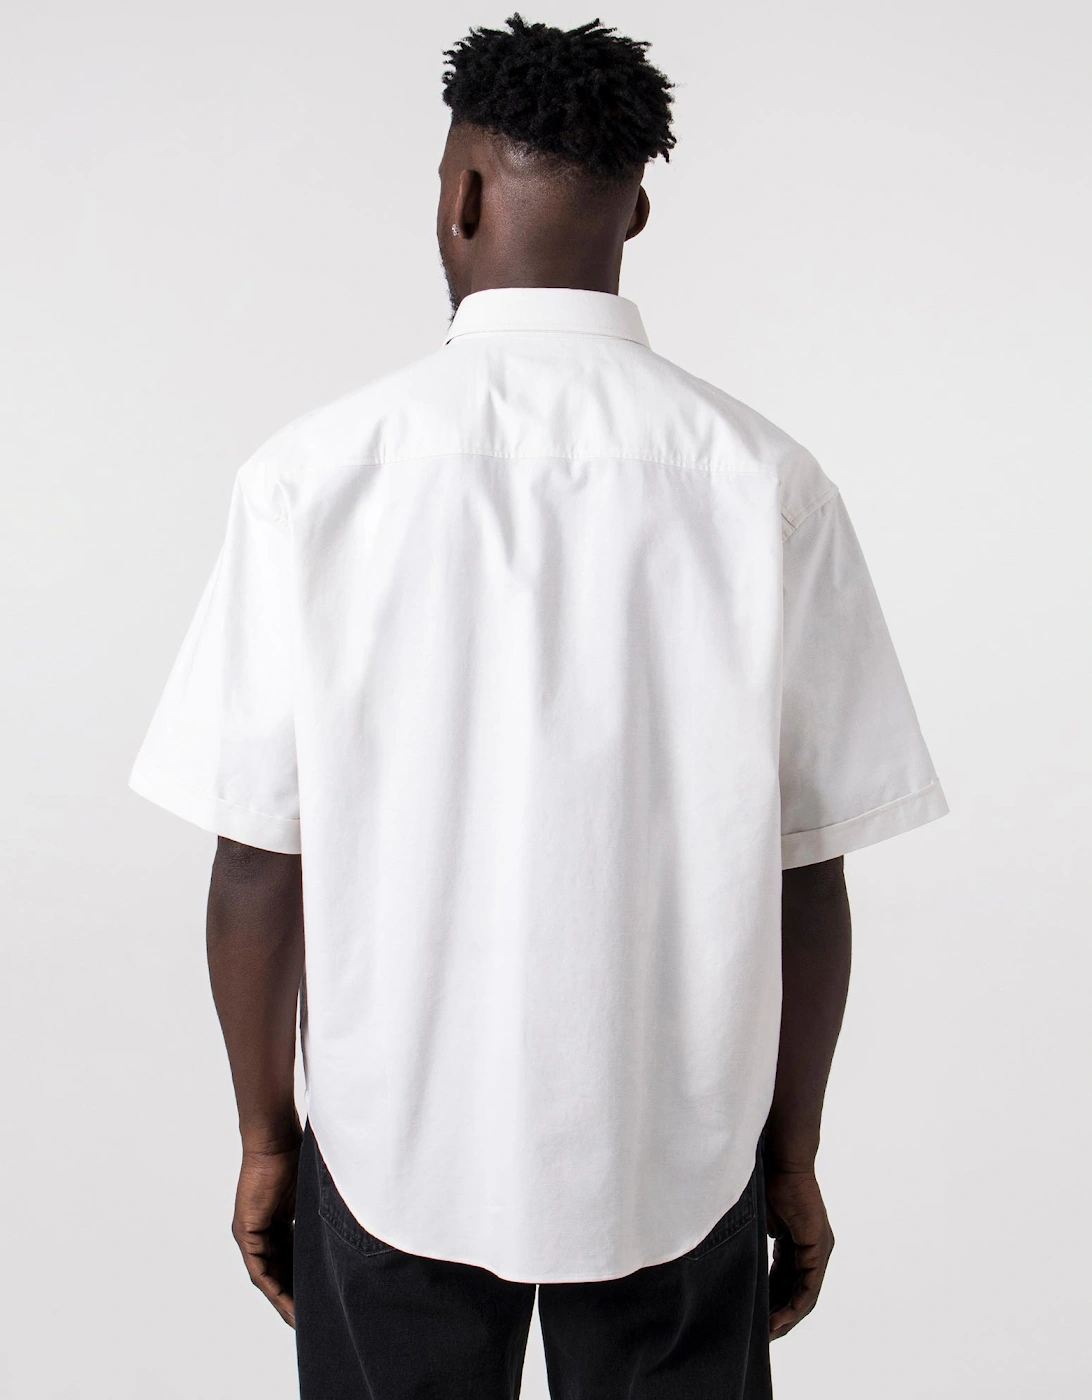 Relaxed Fit Short Sleeve Shirt